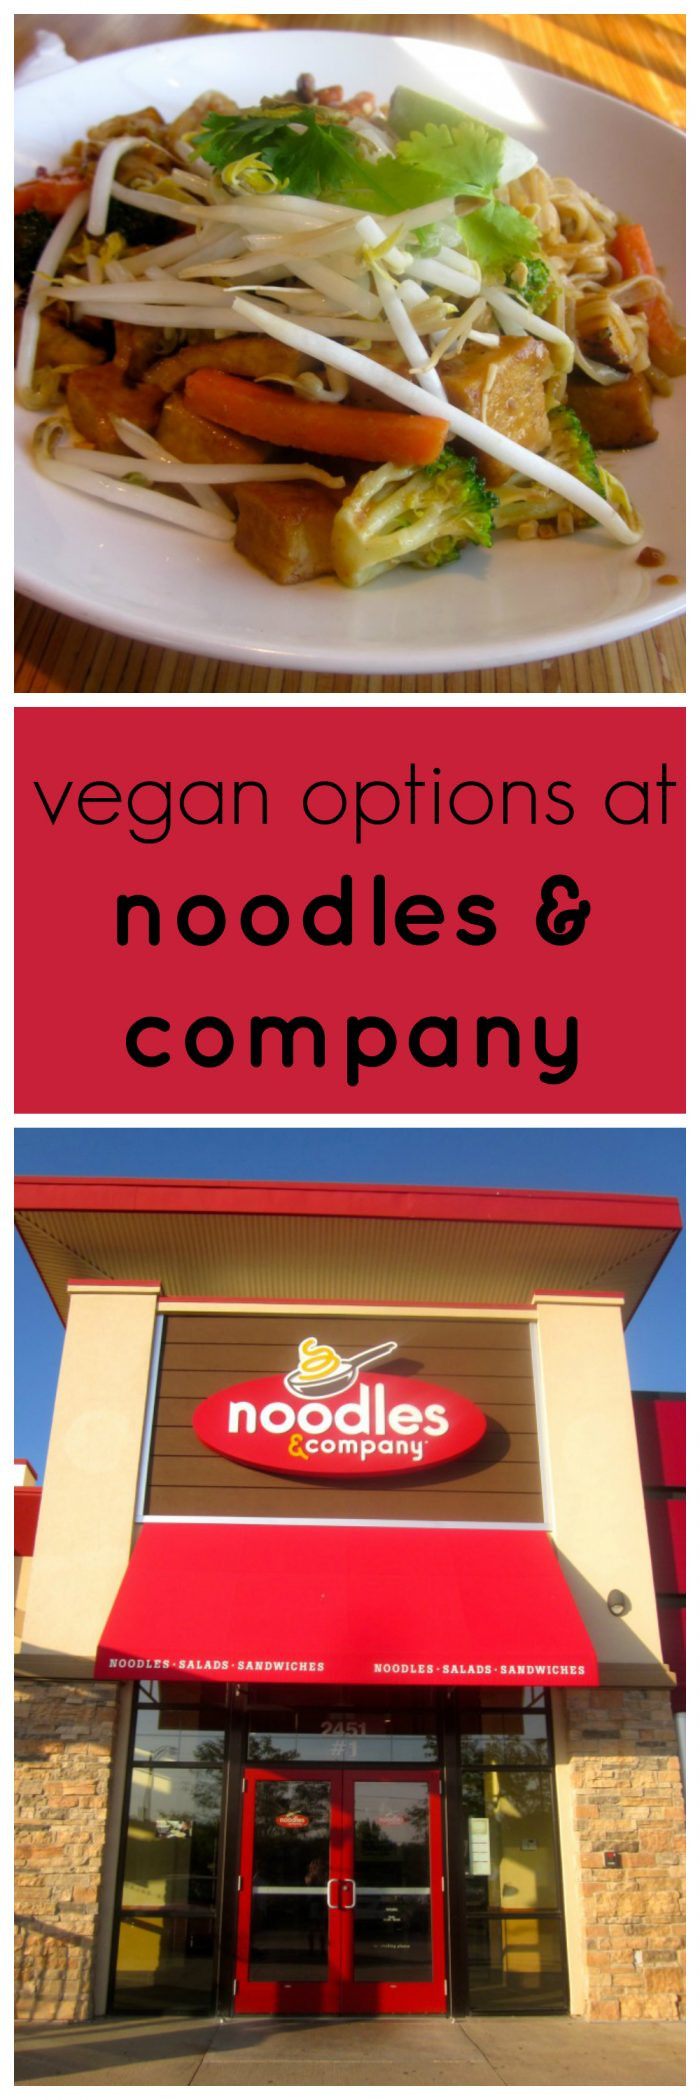 Noodles And Company Vegan
 Noodles and pany vegan options Cadry s Kitchen